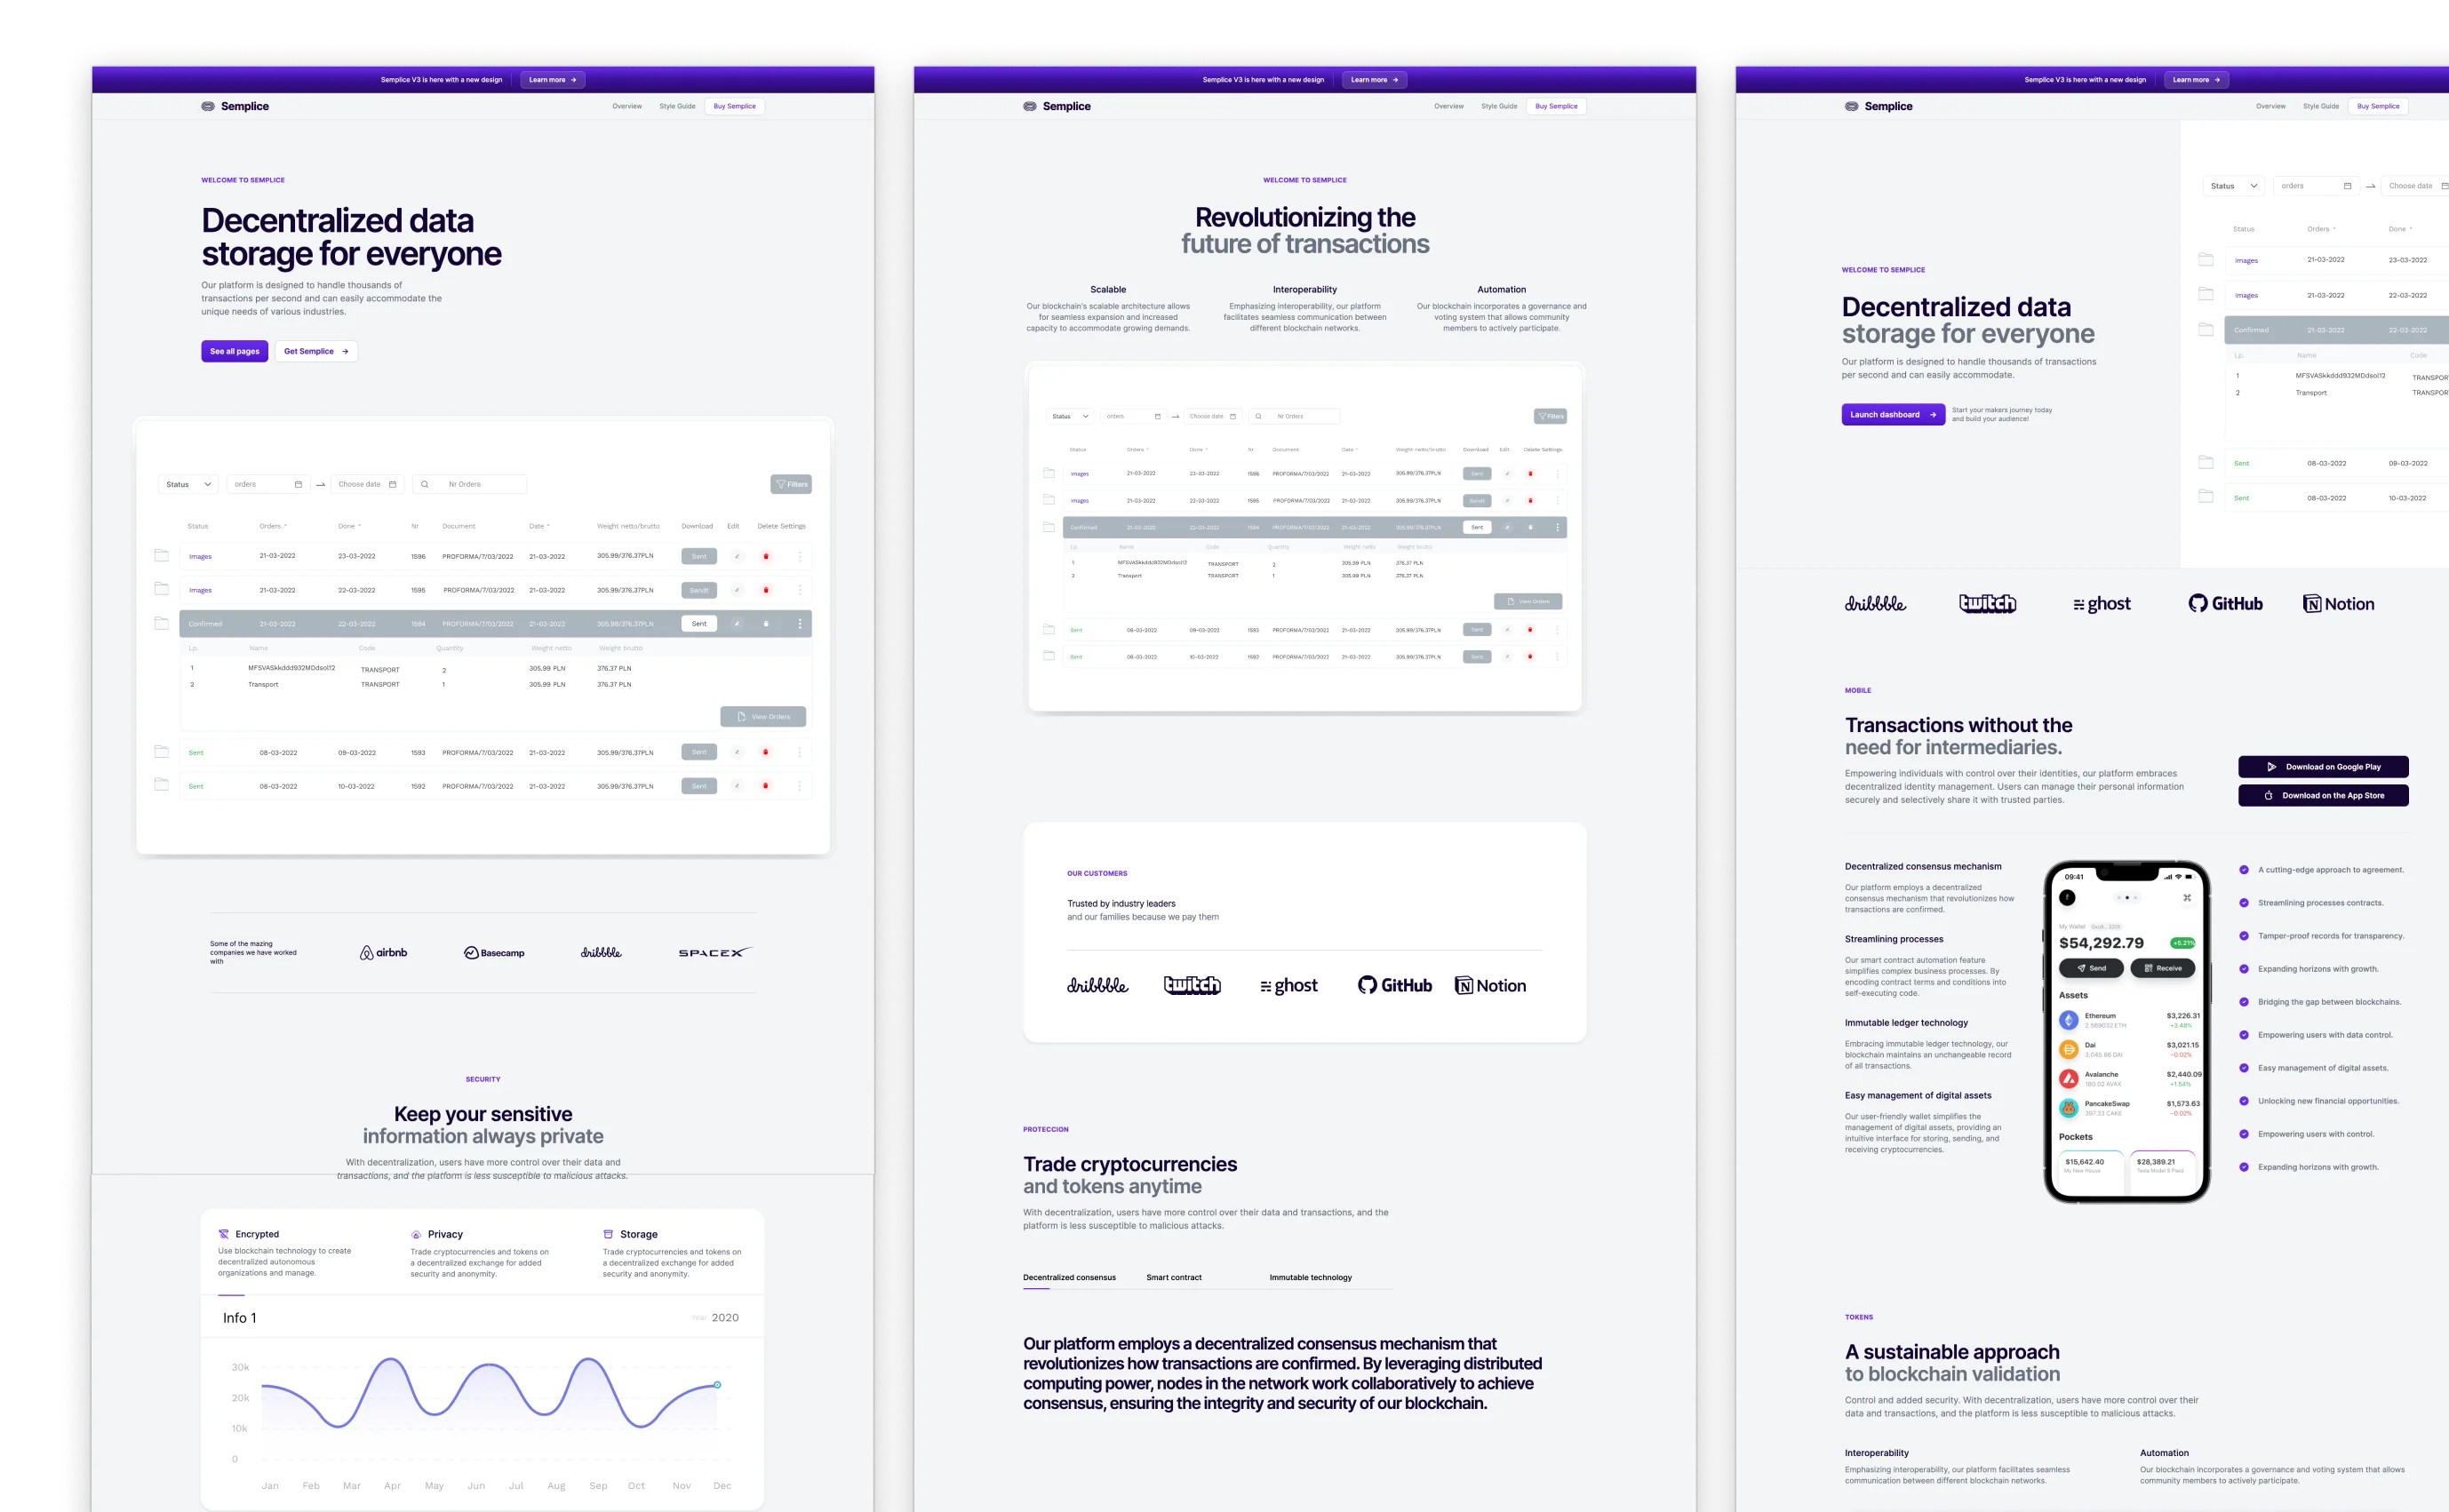 Semplice theme layout for a blockchain-based platform, with a clean and modern design in white and purple. It features sections for decentralized data storage, cryptocurrency trading, and secure transactions, alongside mobile app views for trading and wallet management.